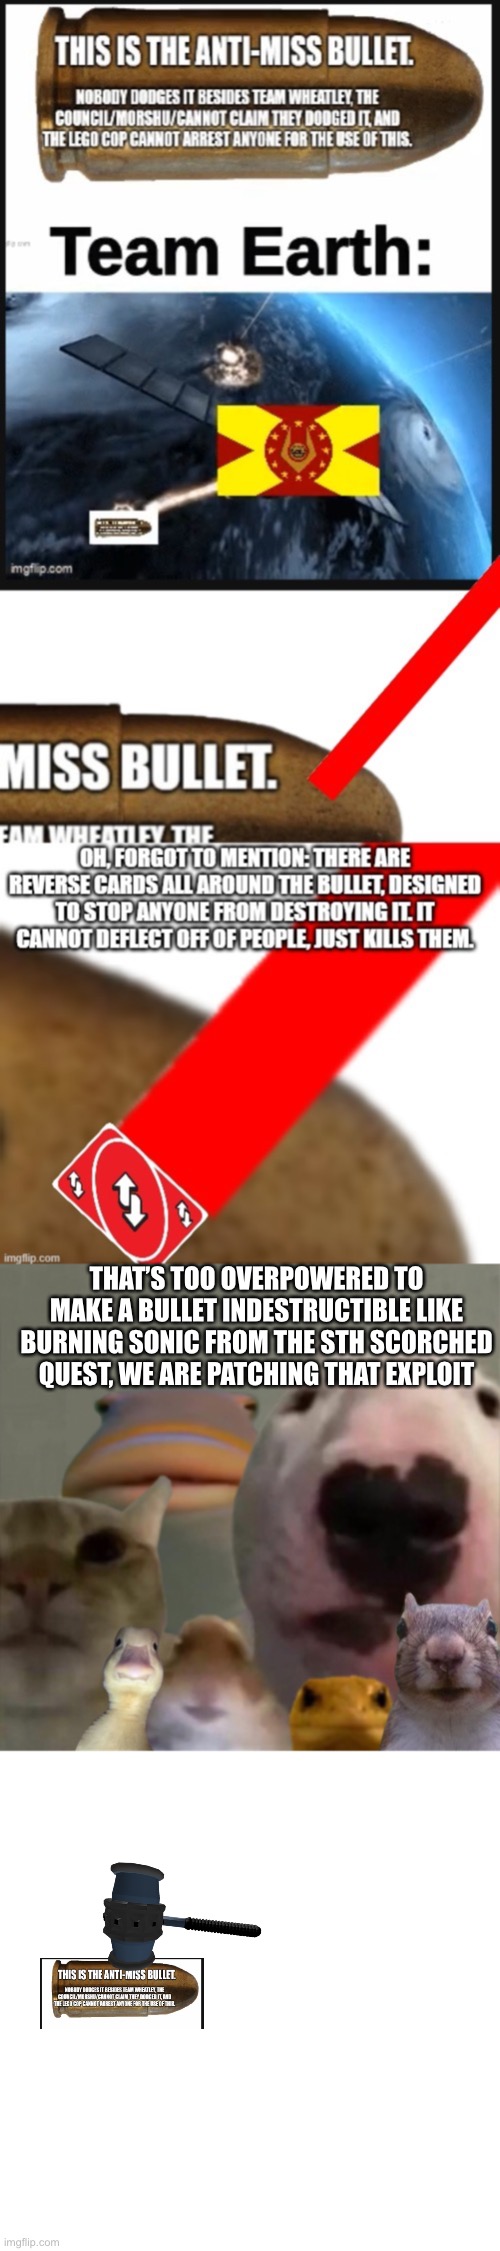 THAT’S TOO OVERPOWERED TO MAKE A BULLET INDESTRUCTIBLE LIKE BURNING SONIC FROM THE STH SCORCHED QUEST, WE ARE PATCHING THAT EXPLOIT | image tagged in the council remastered,memes,blank transparent square | made w/ Imgflip meme maker